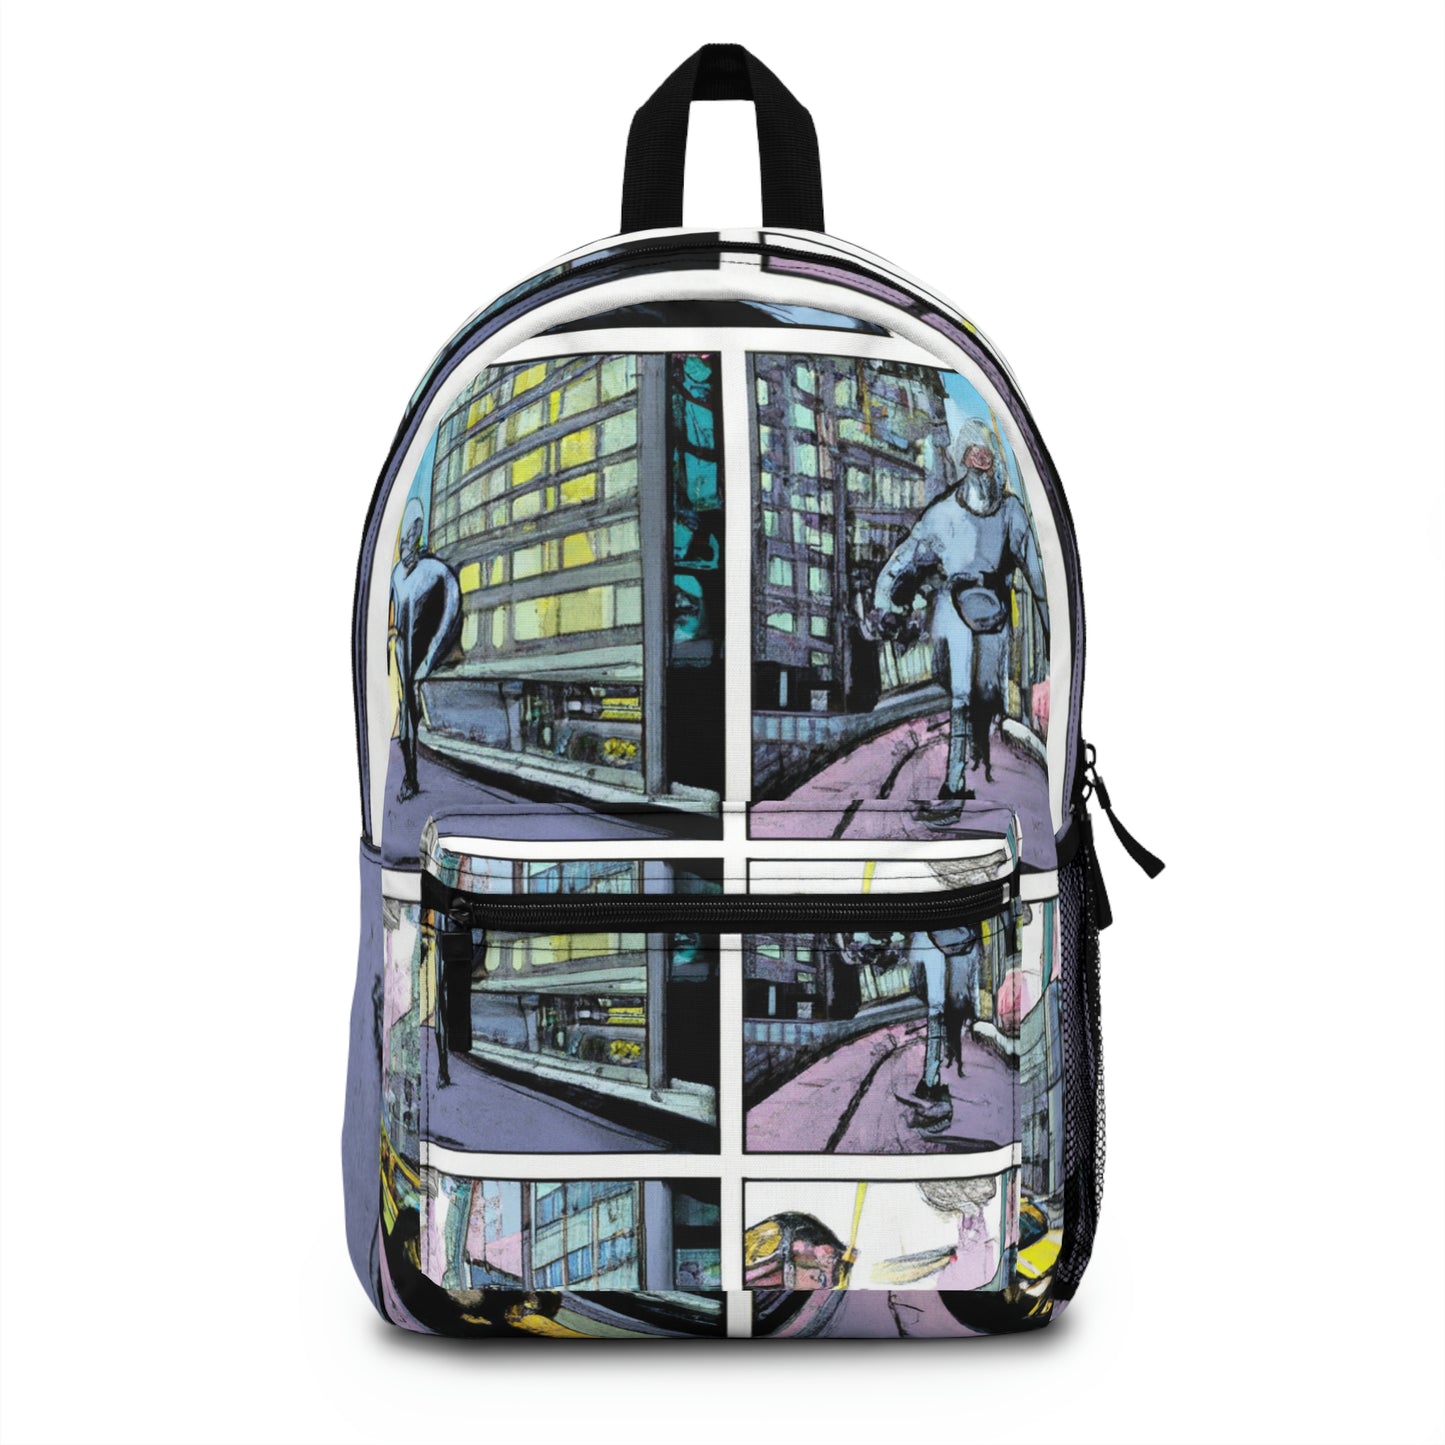 Stormy Knight - Comic Book Backpack